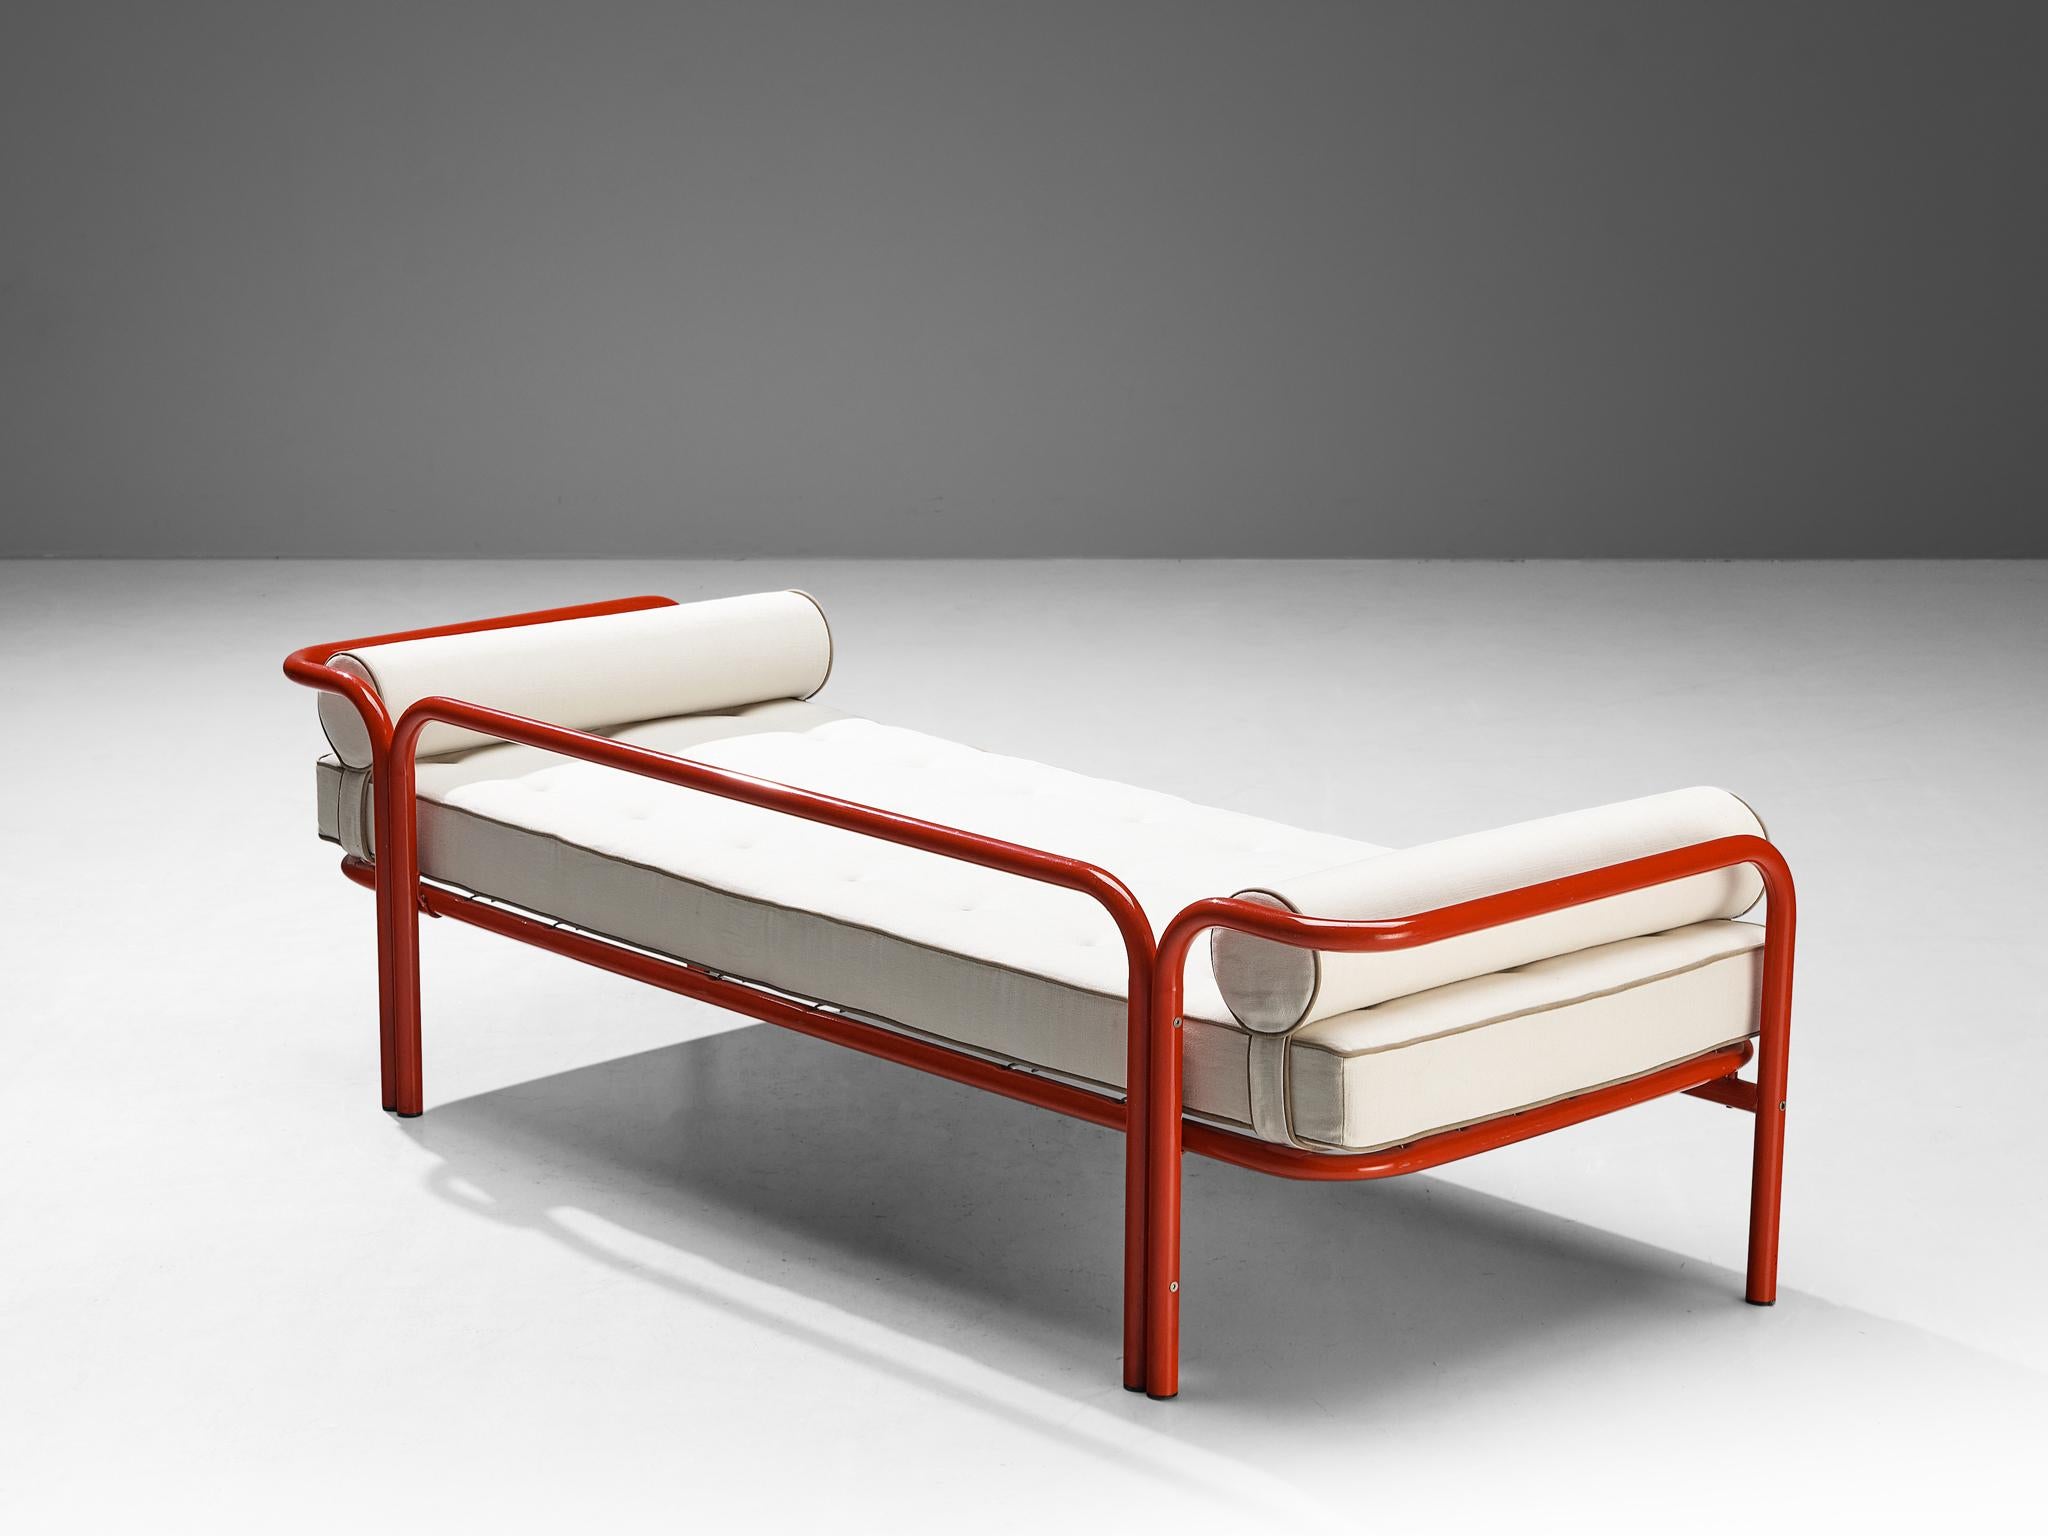 Gae Aulenti for Poltronova Production, daybed model 'Locus Solus', red laquered steel, Italy, 1964 

This daybed by Gae Aulenti is part of the 'Locus Solus' series created in 1964. The bed is based on a constructive frame that left out all possible